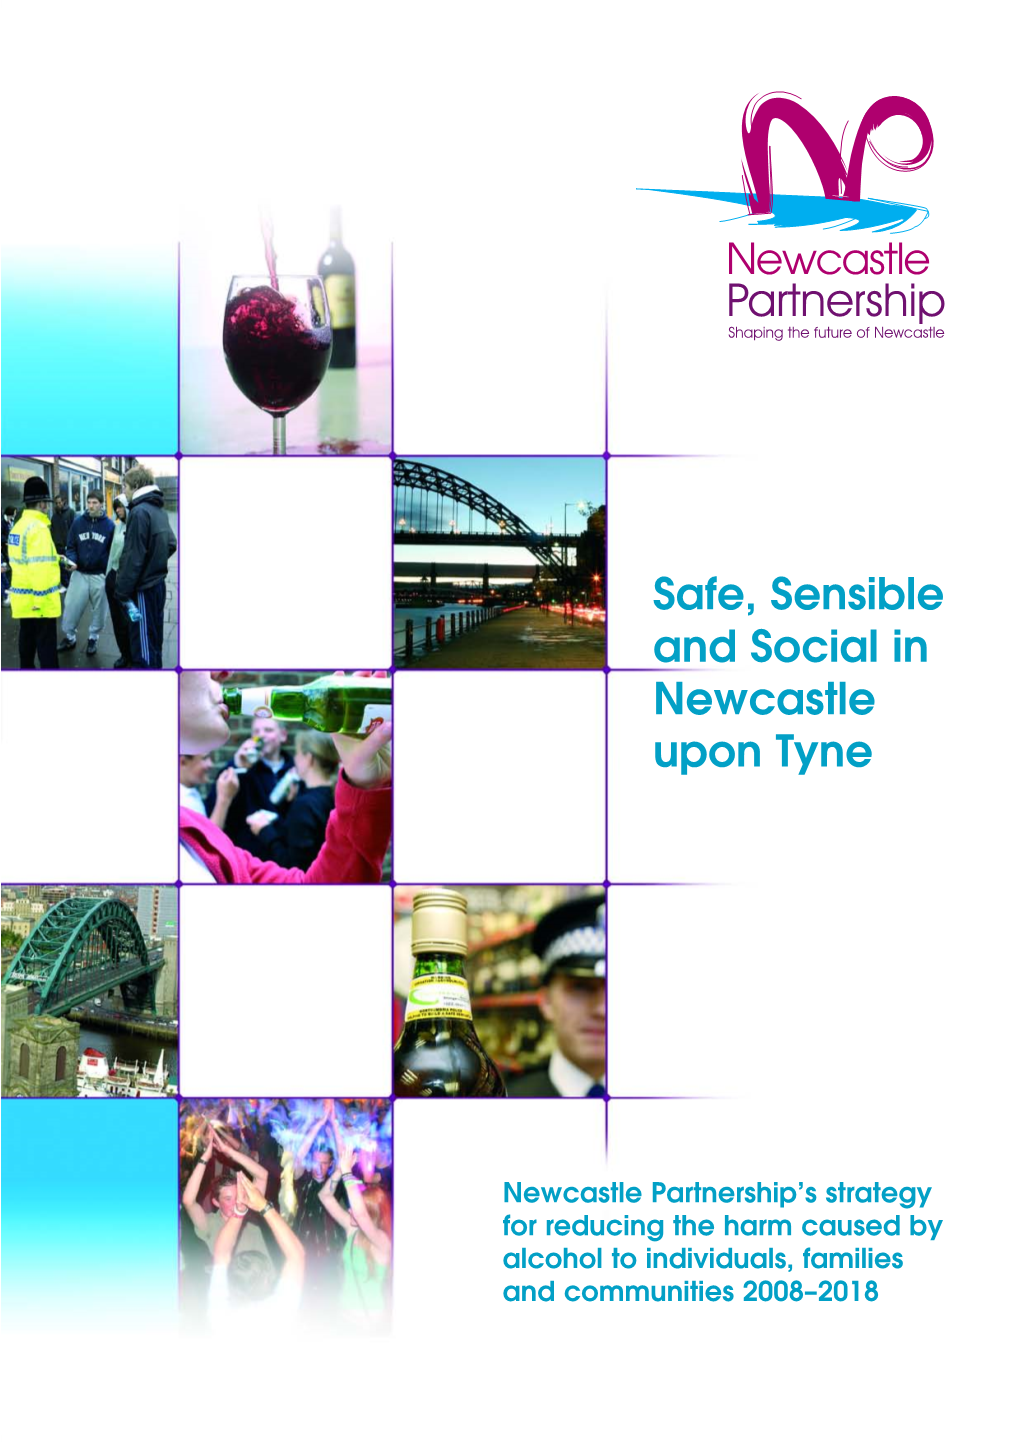 Safe, Sensible and Social in Newcastle Upon Tyne